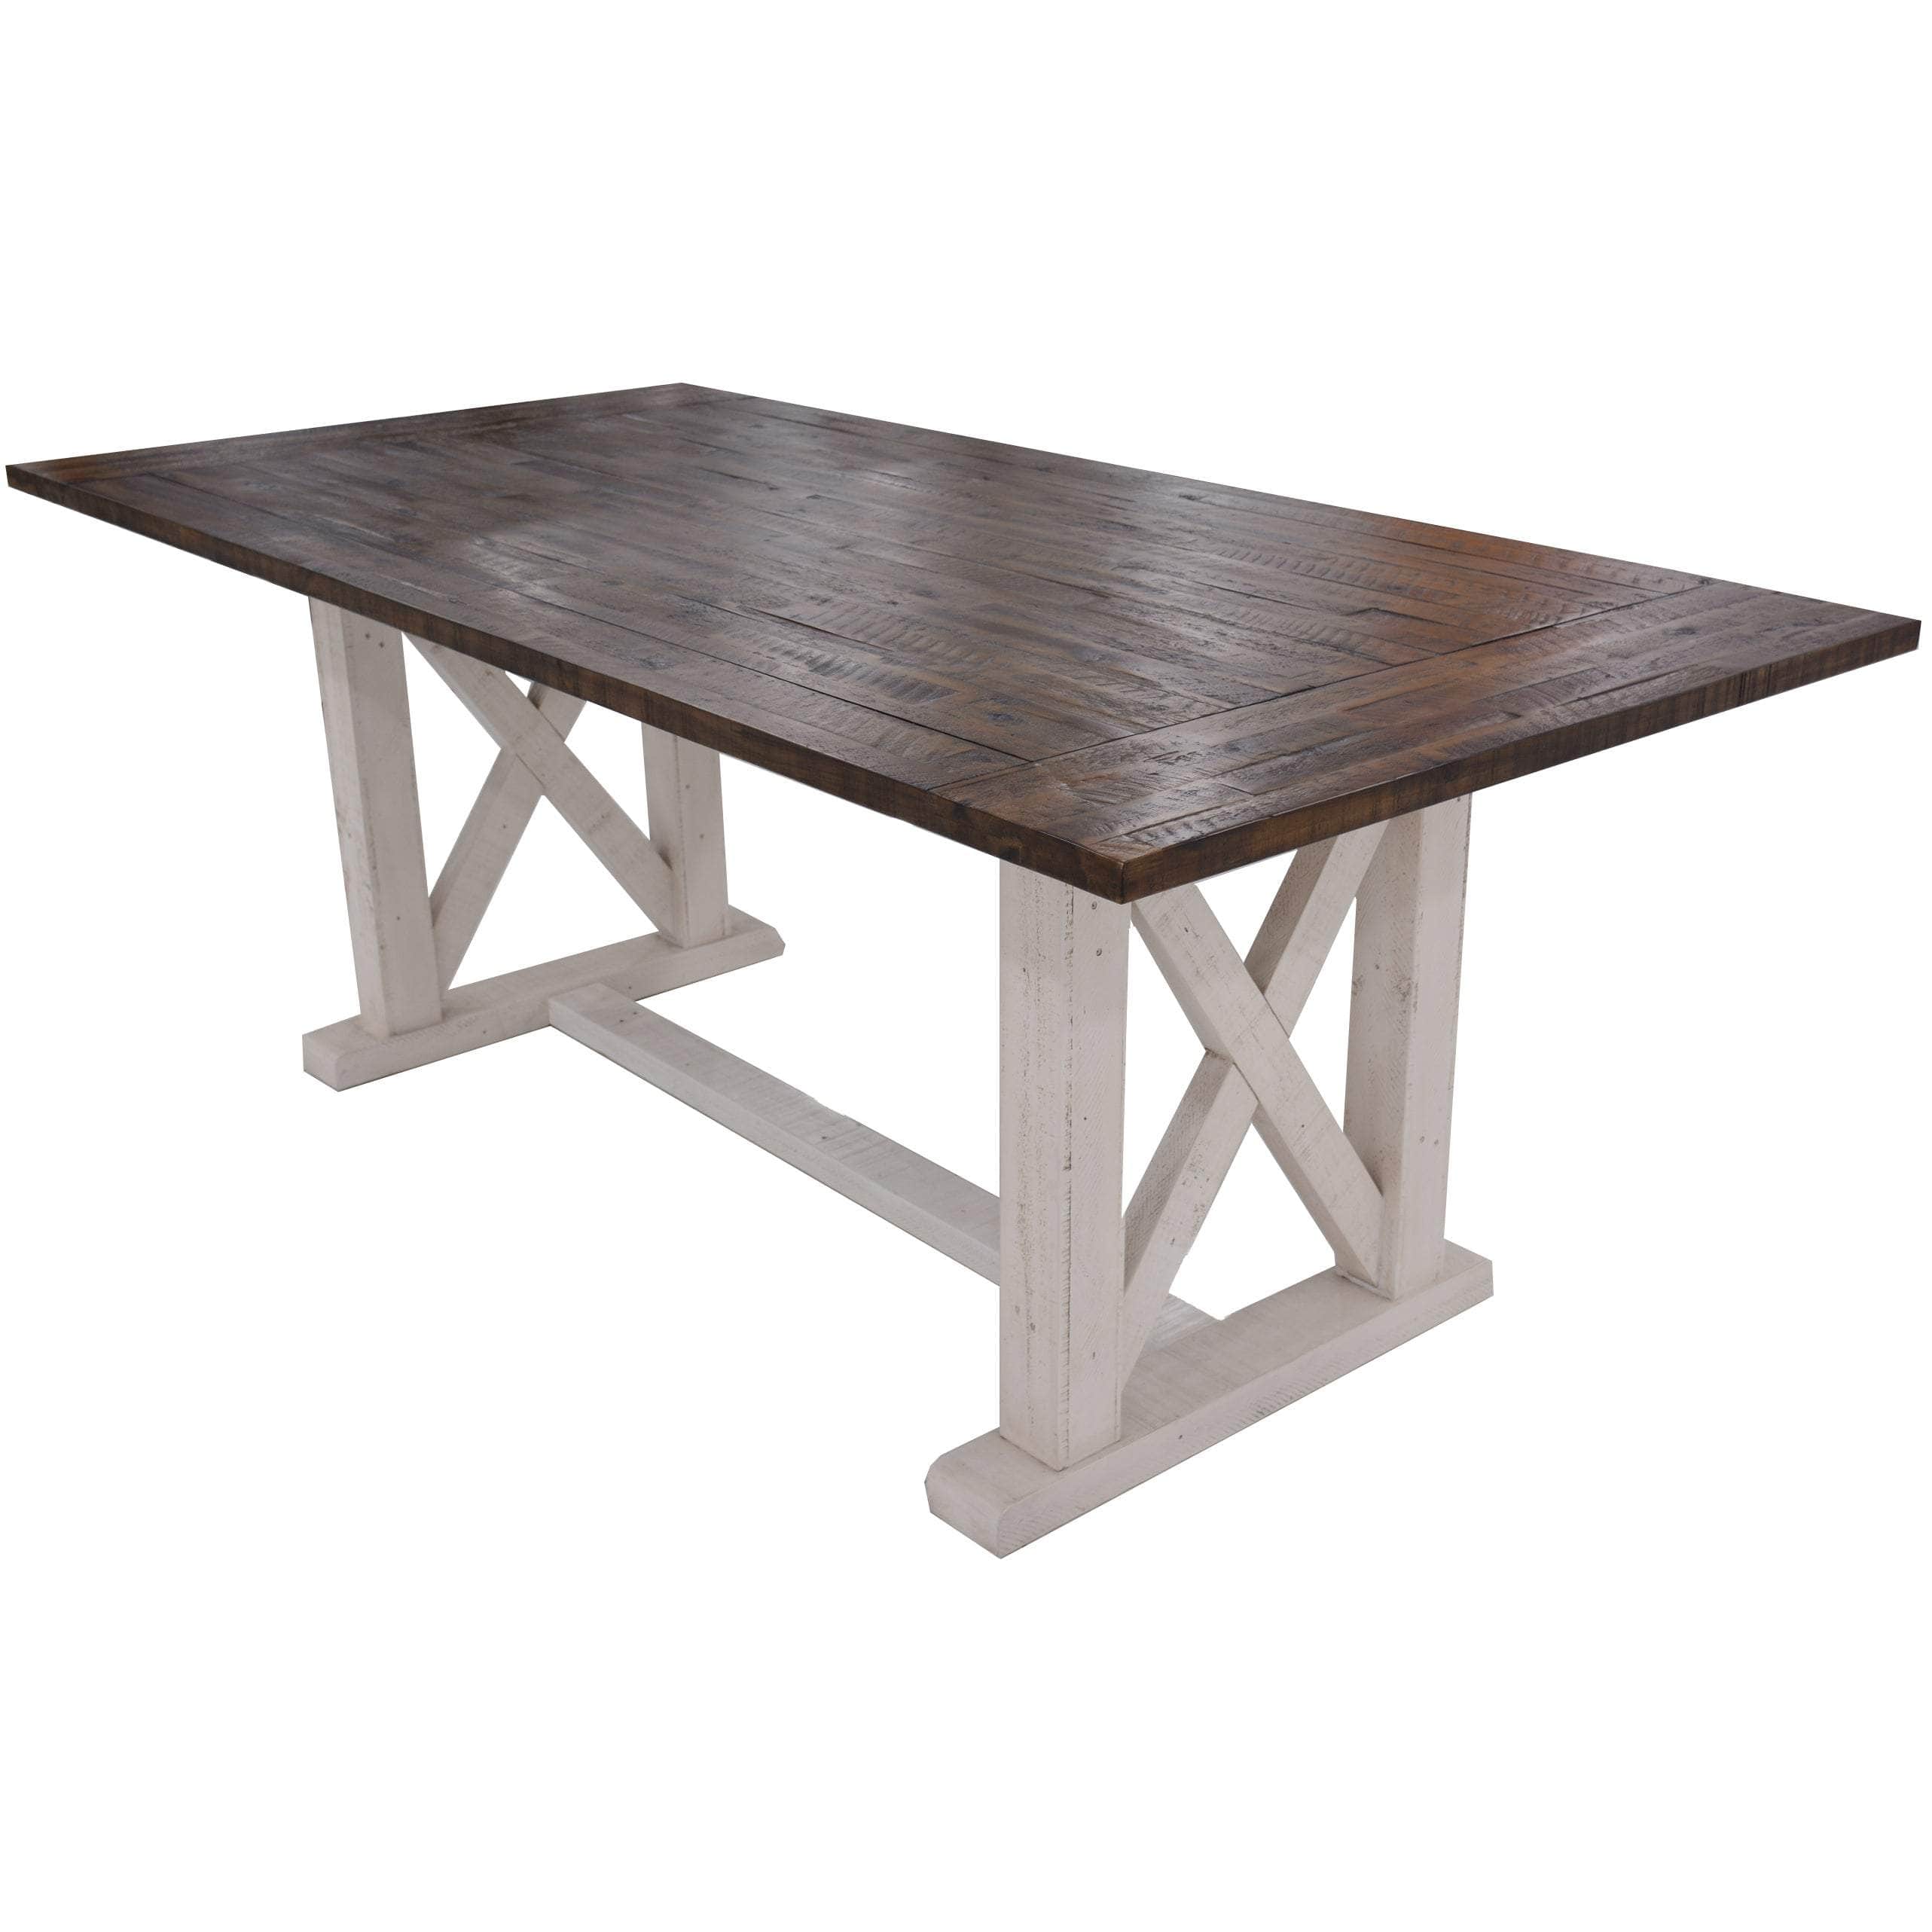 Brown and White Dining Table crafted from 200cm Solid Acacia Timber Wood